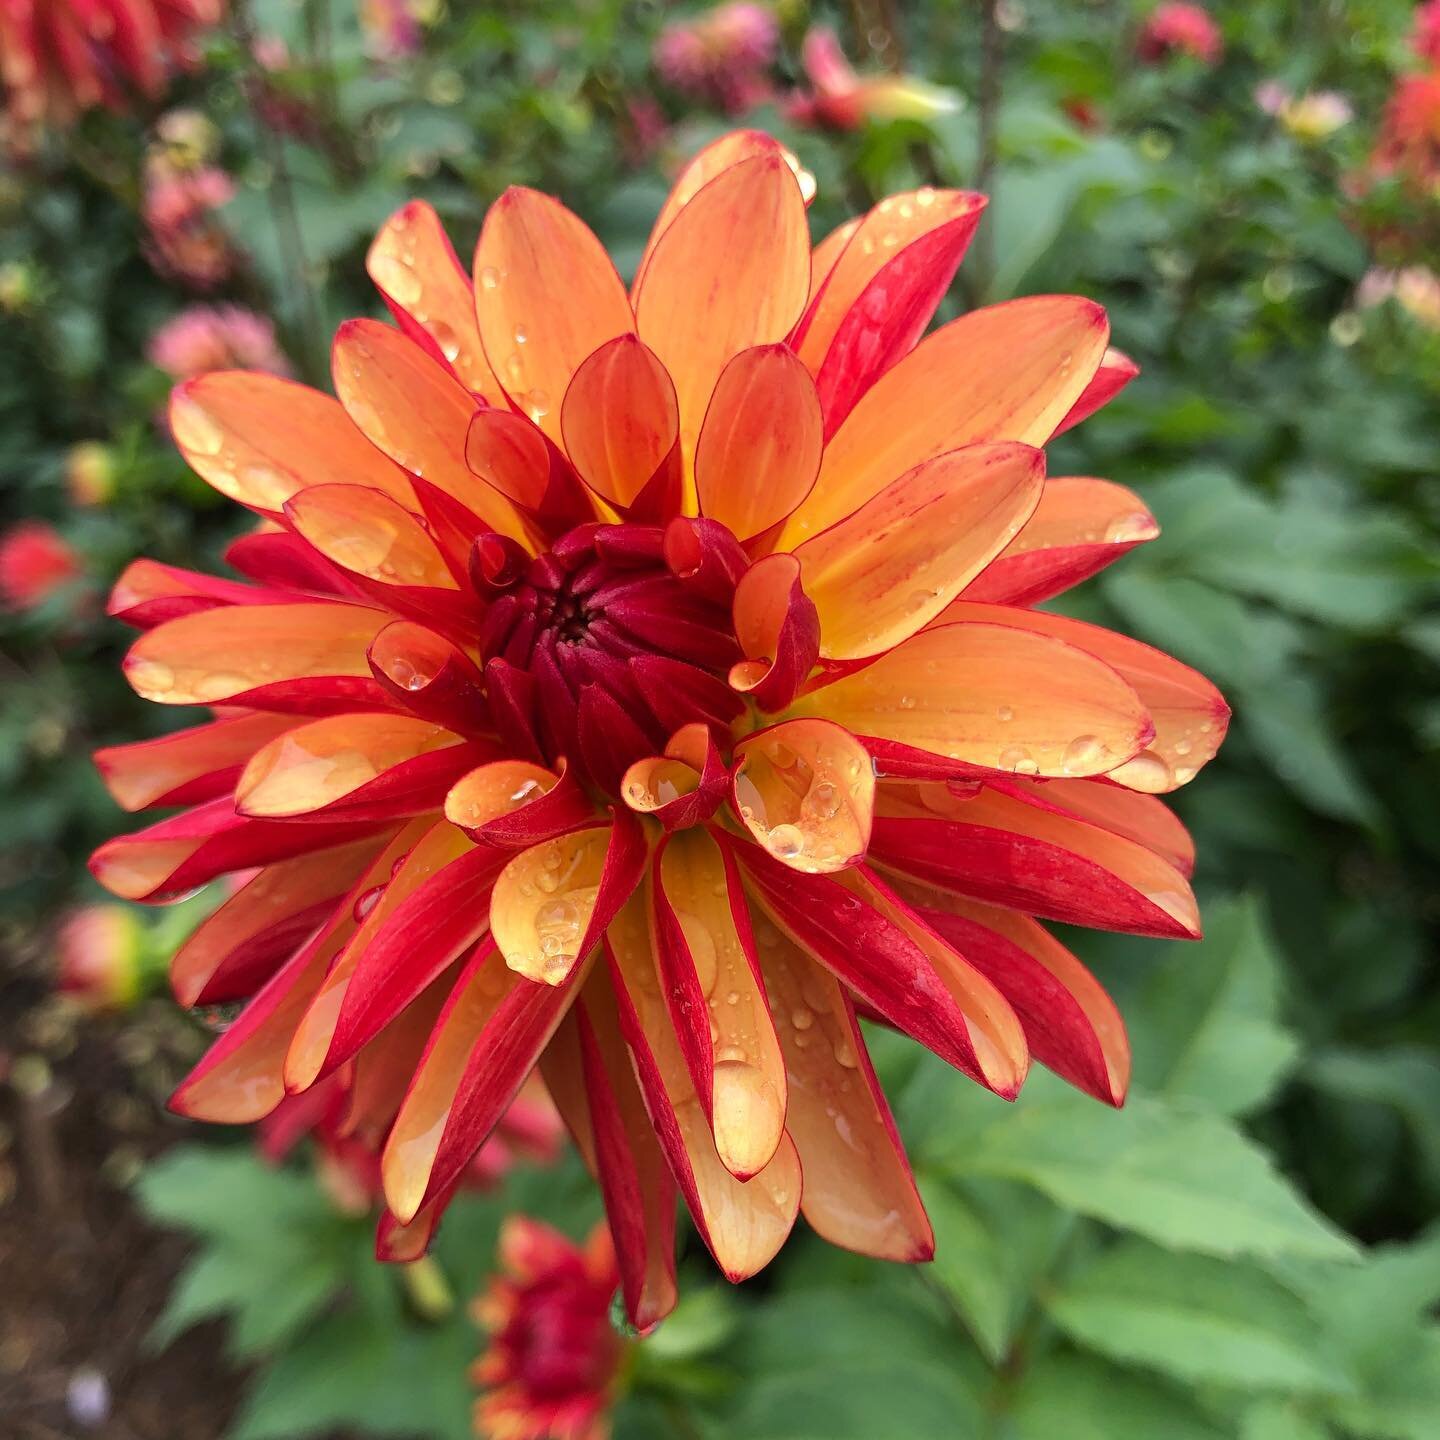 💥 Crazy Legs 💥.
.
.
✨This two toned rock star reminds me of a firework, and adds some real pop to bouquets 🔥.
.
.
She will be part of our tuber sale this SATURDAY at noon - set a timer, dahlia mania is real this year 🤯.
.
.
#feederflowerfarm #flo